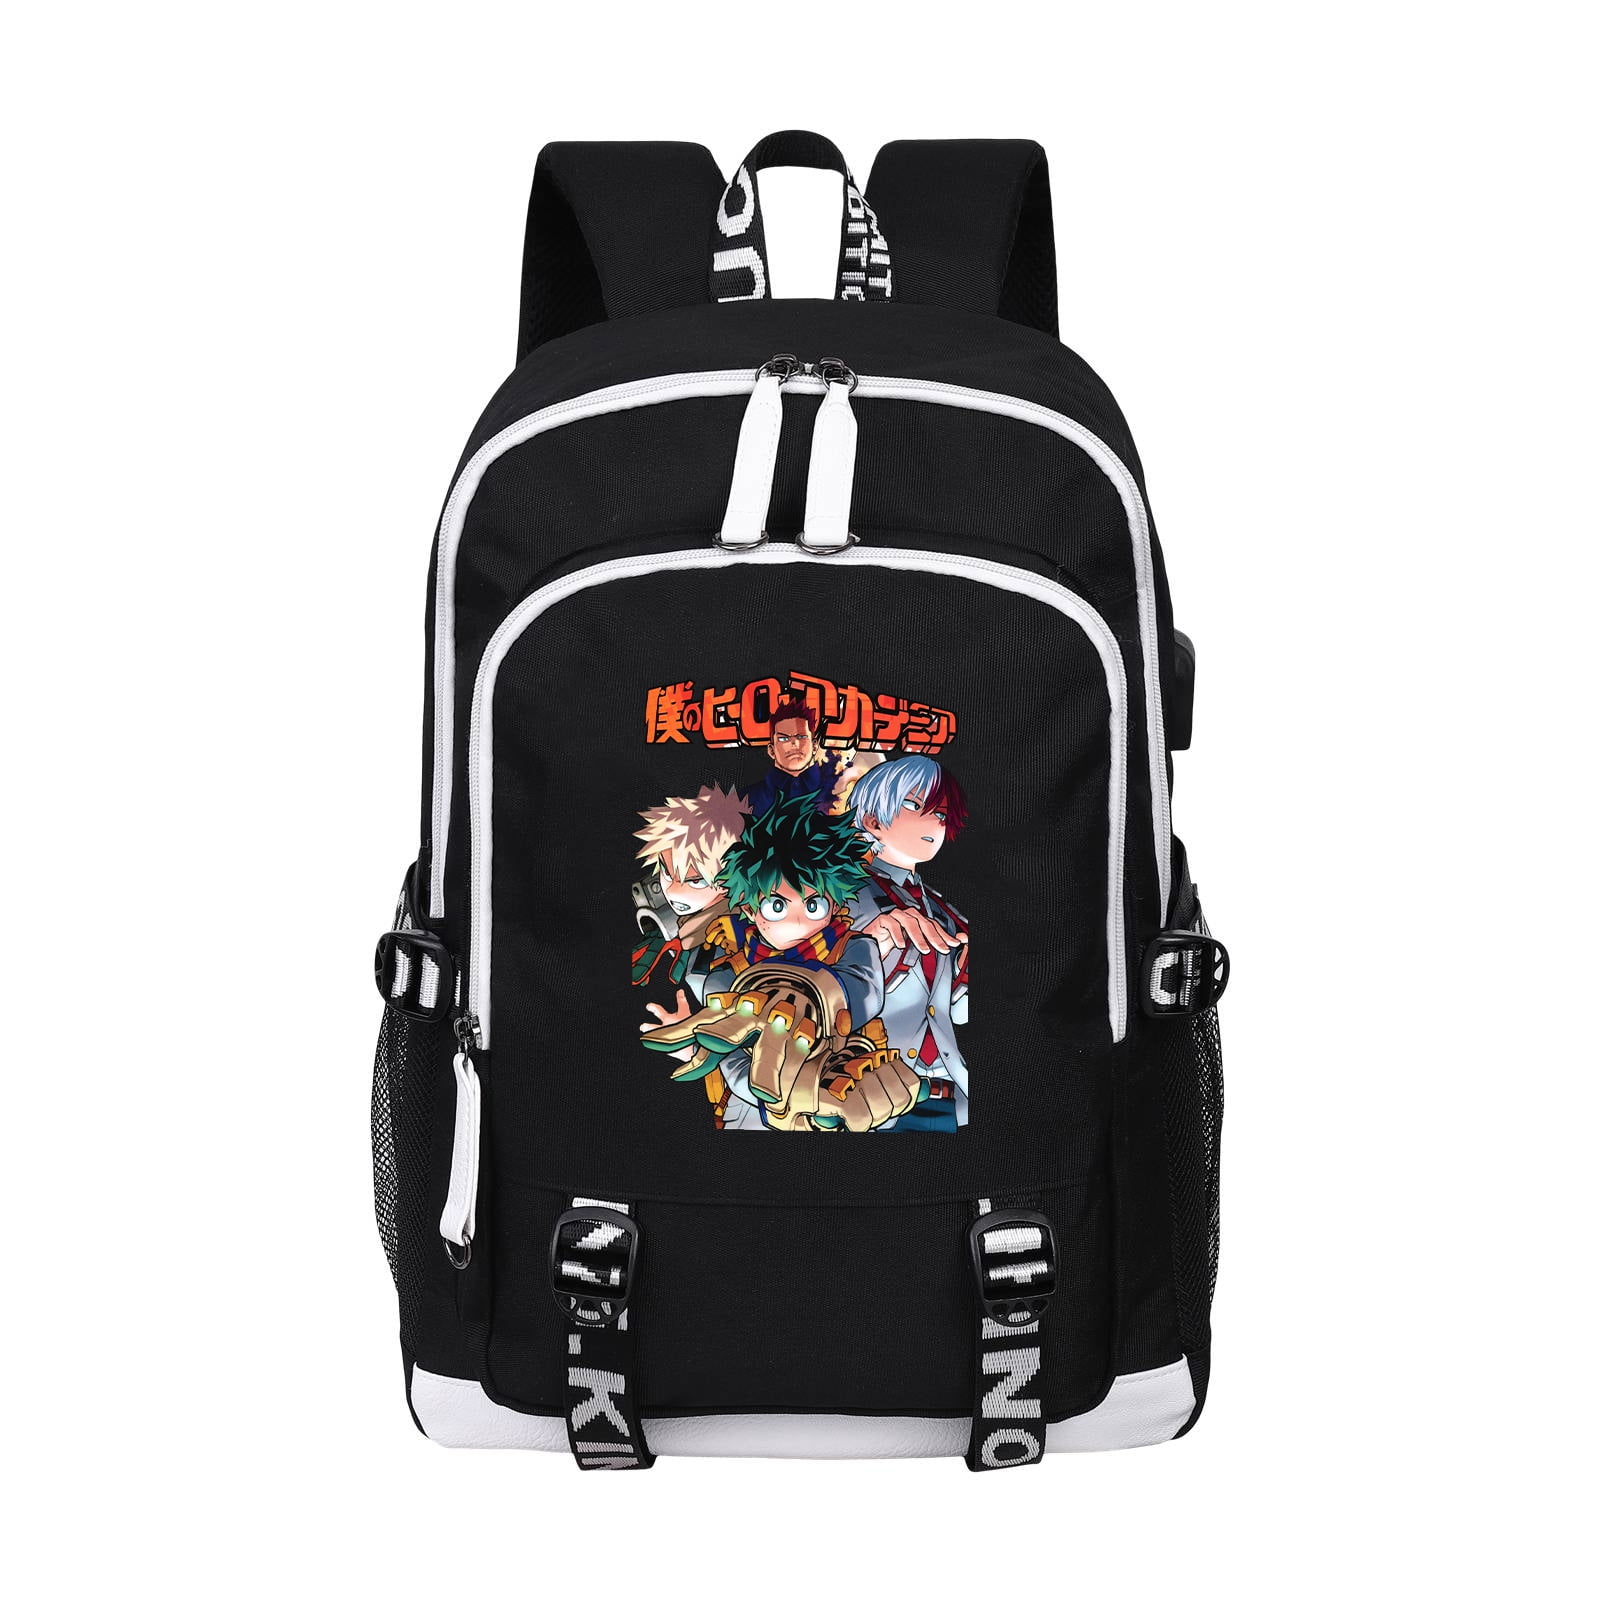 Anime No Game No Life Cosplay Backpack Large Capacity Laptop Bag Backpack